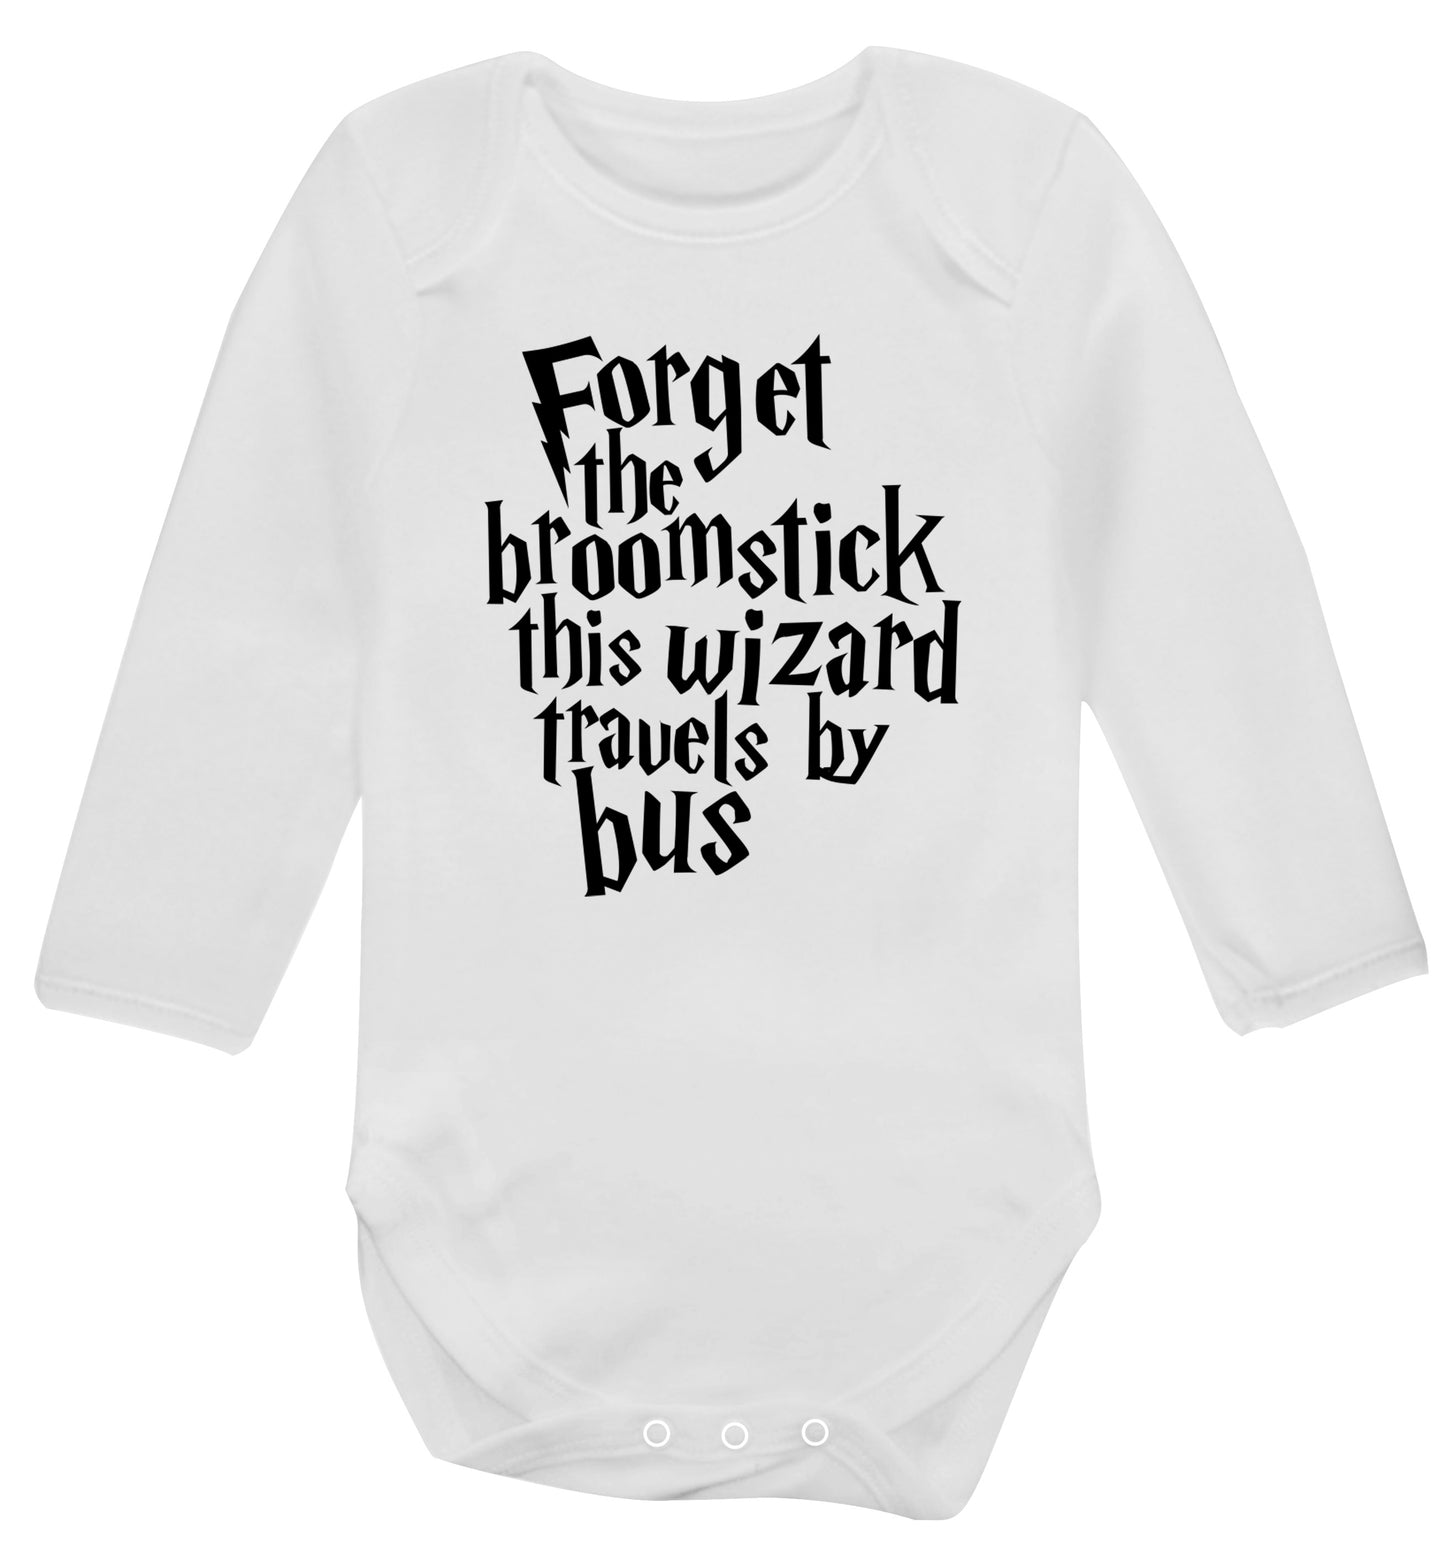 Forget the broomstick this wizard travels by bus Baby Vest long sleeved white 6-12 months